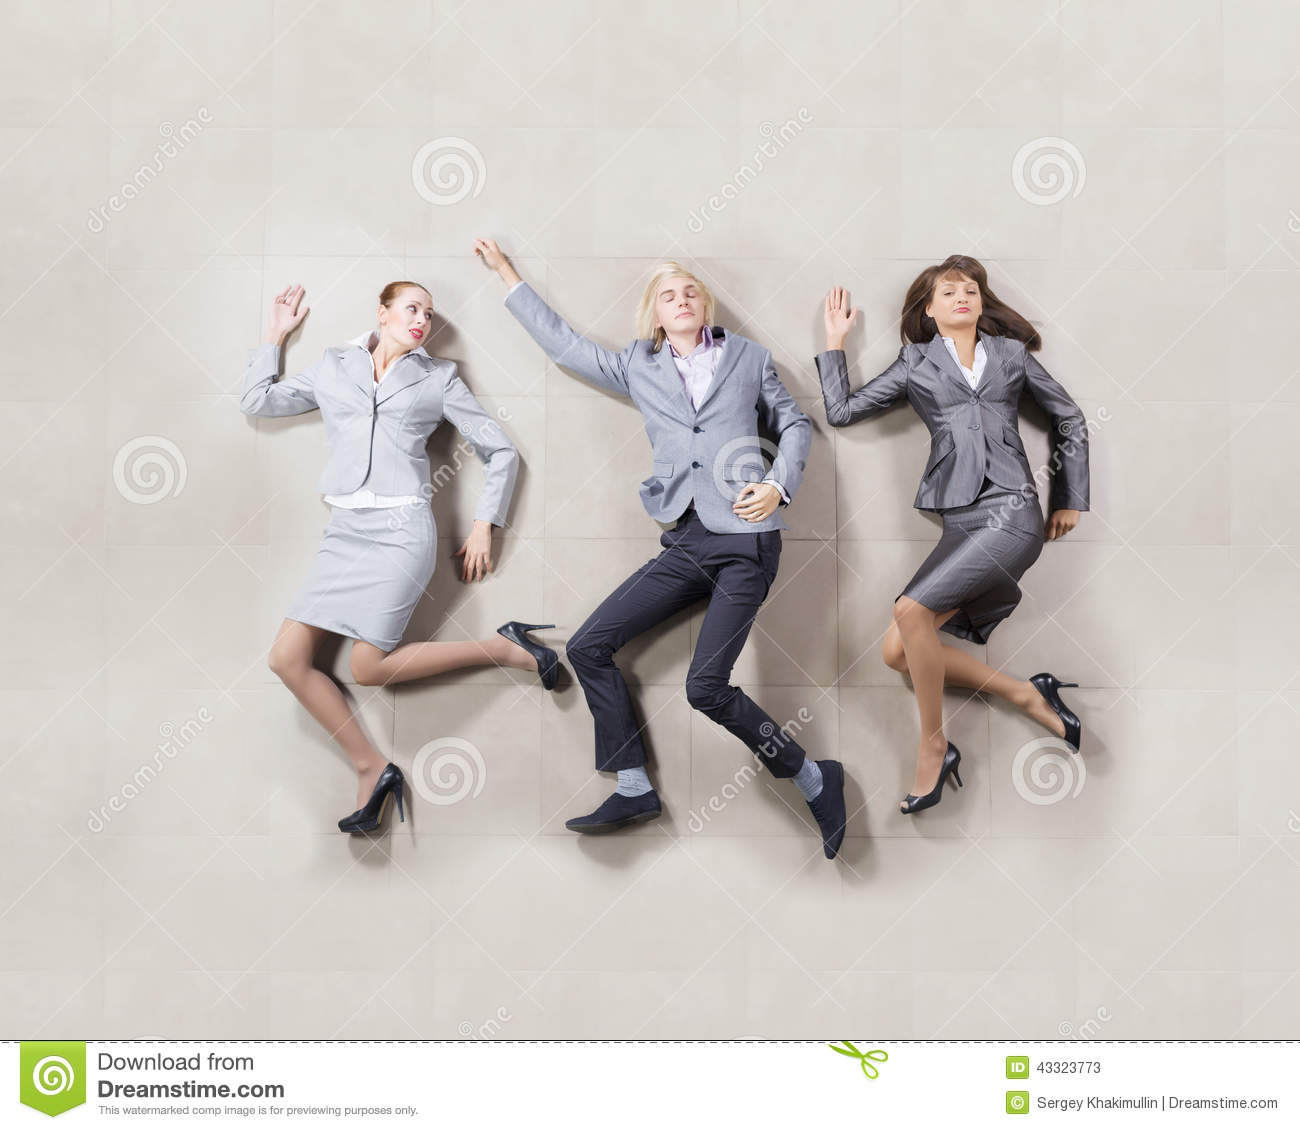 Funny Business People Running